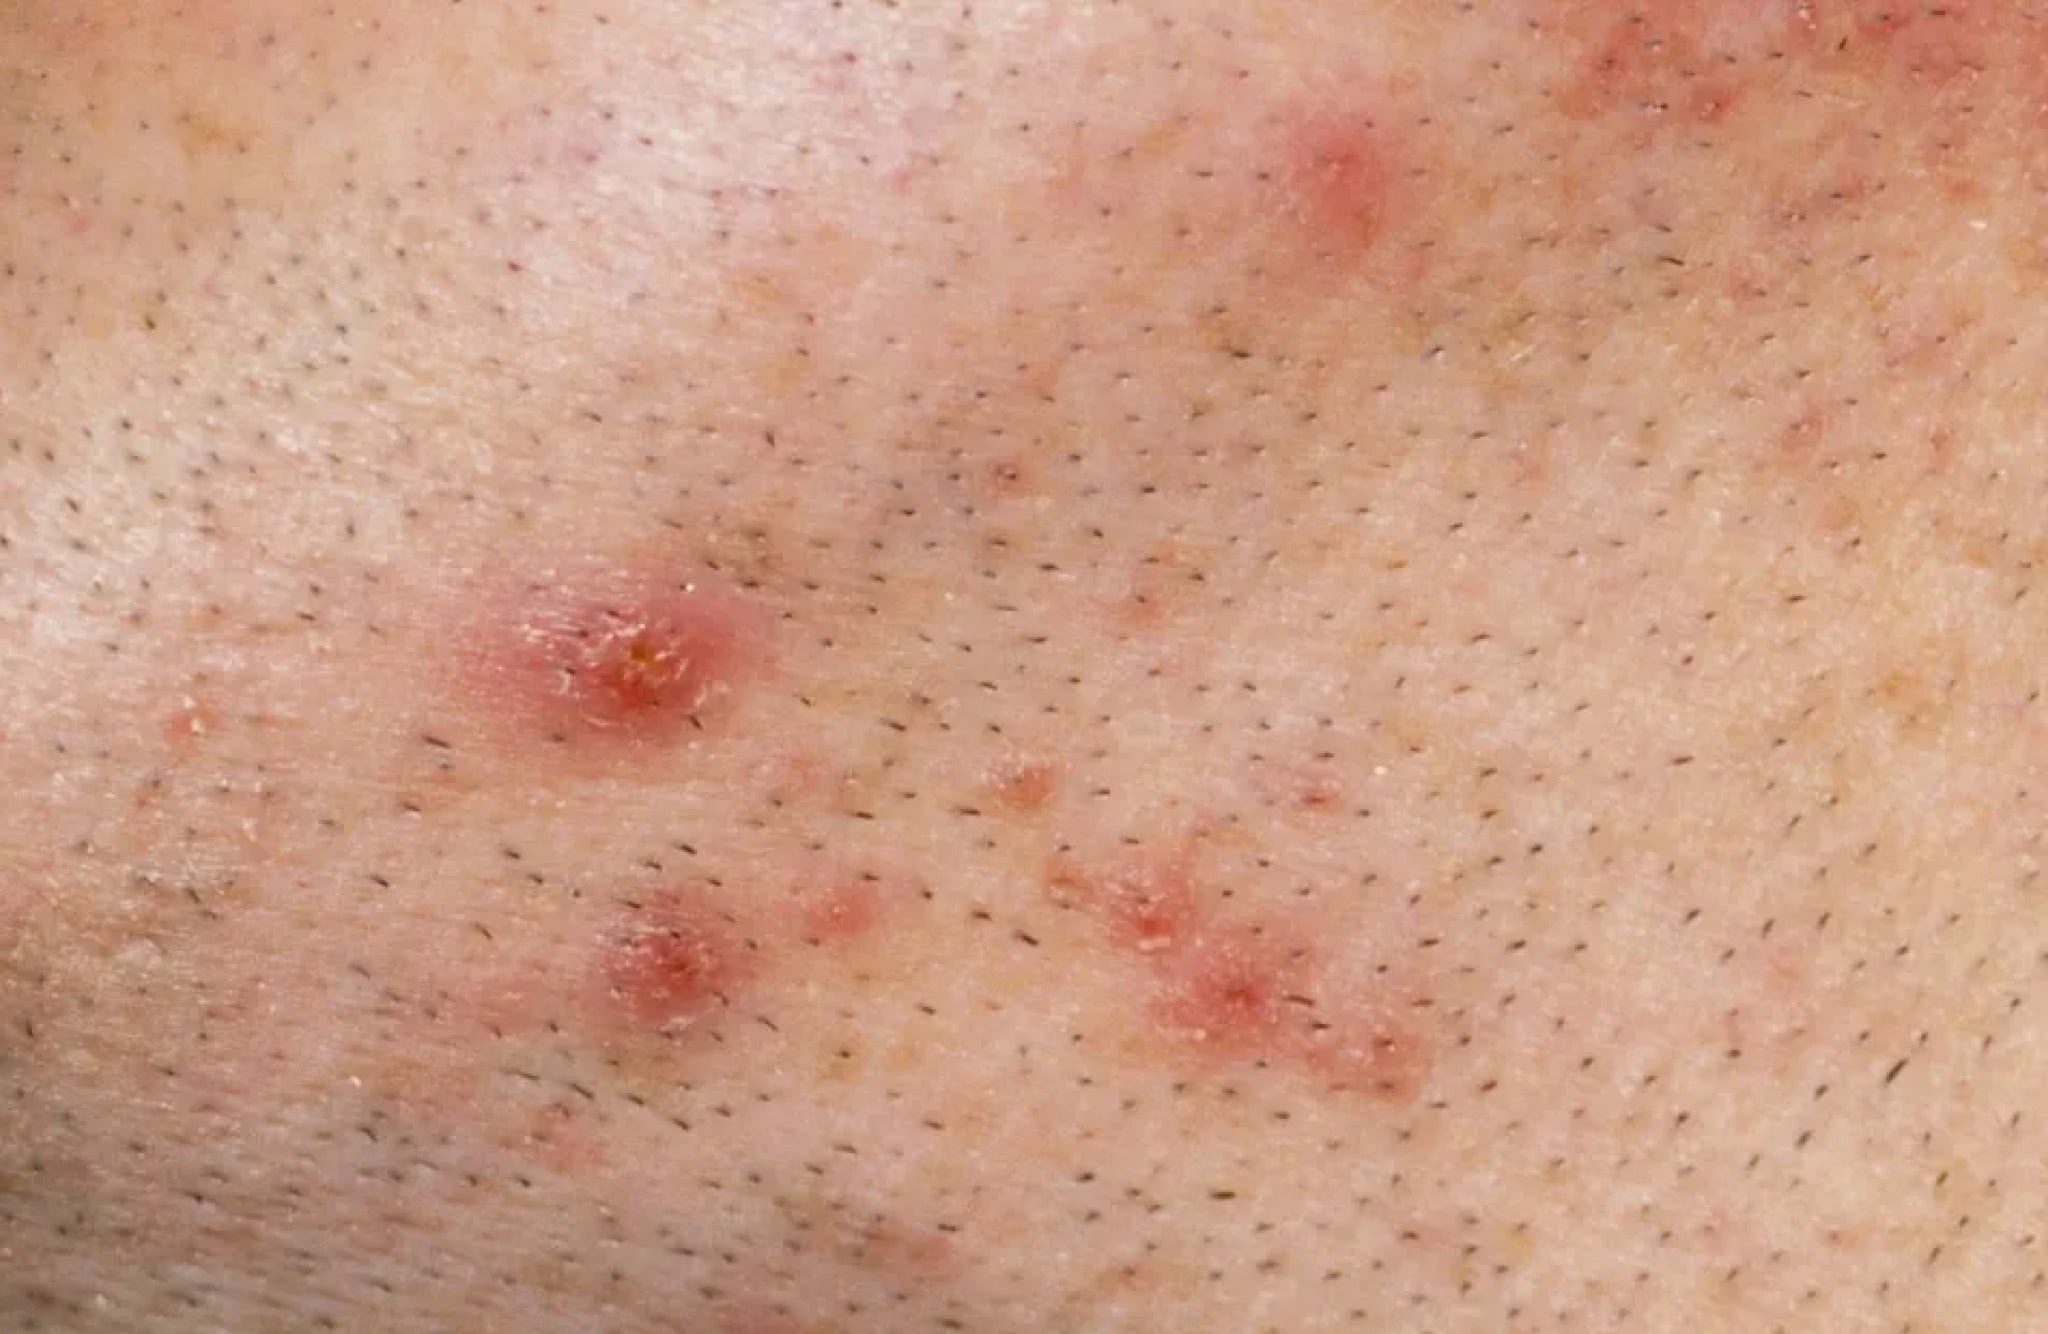 bumps after laser hair removal